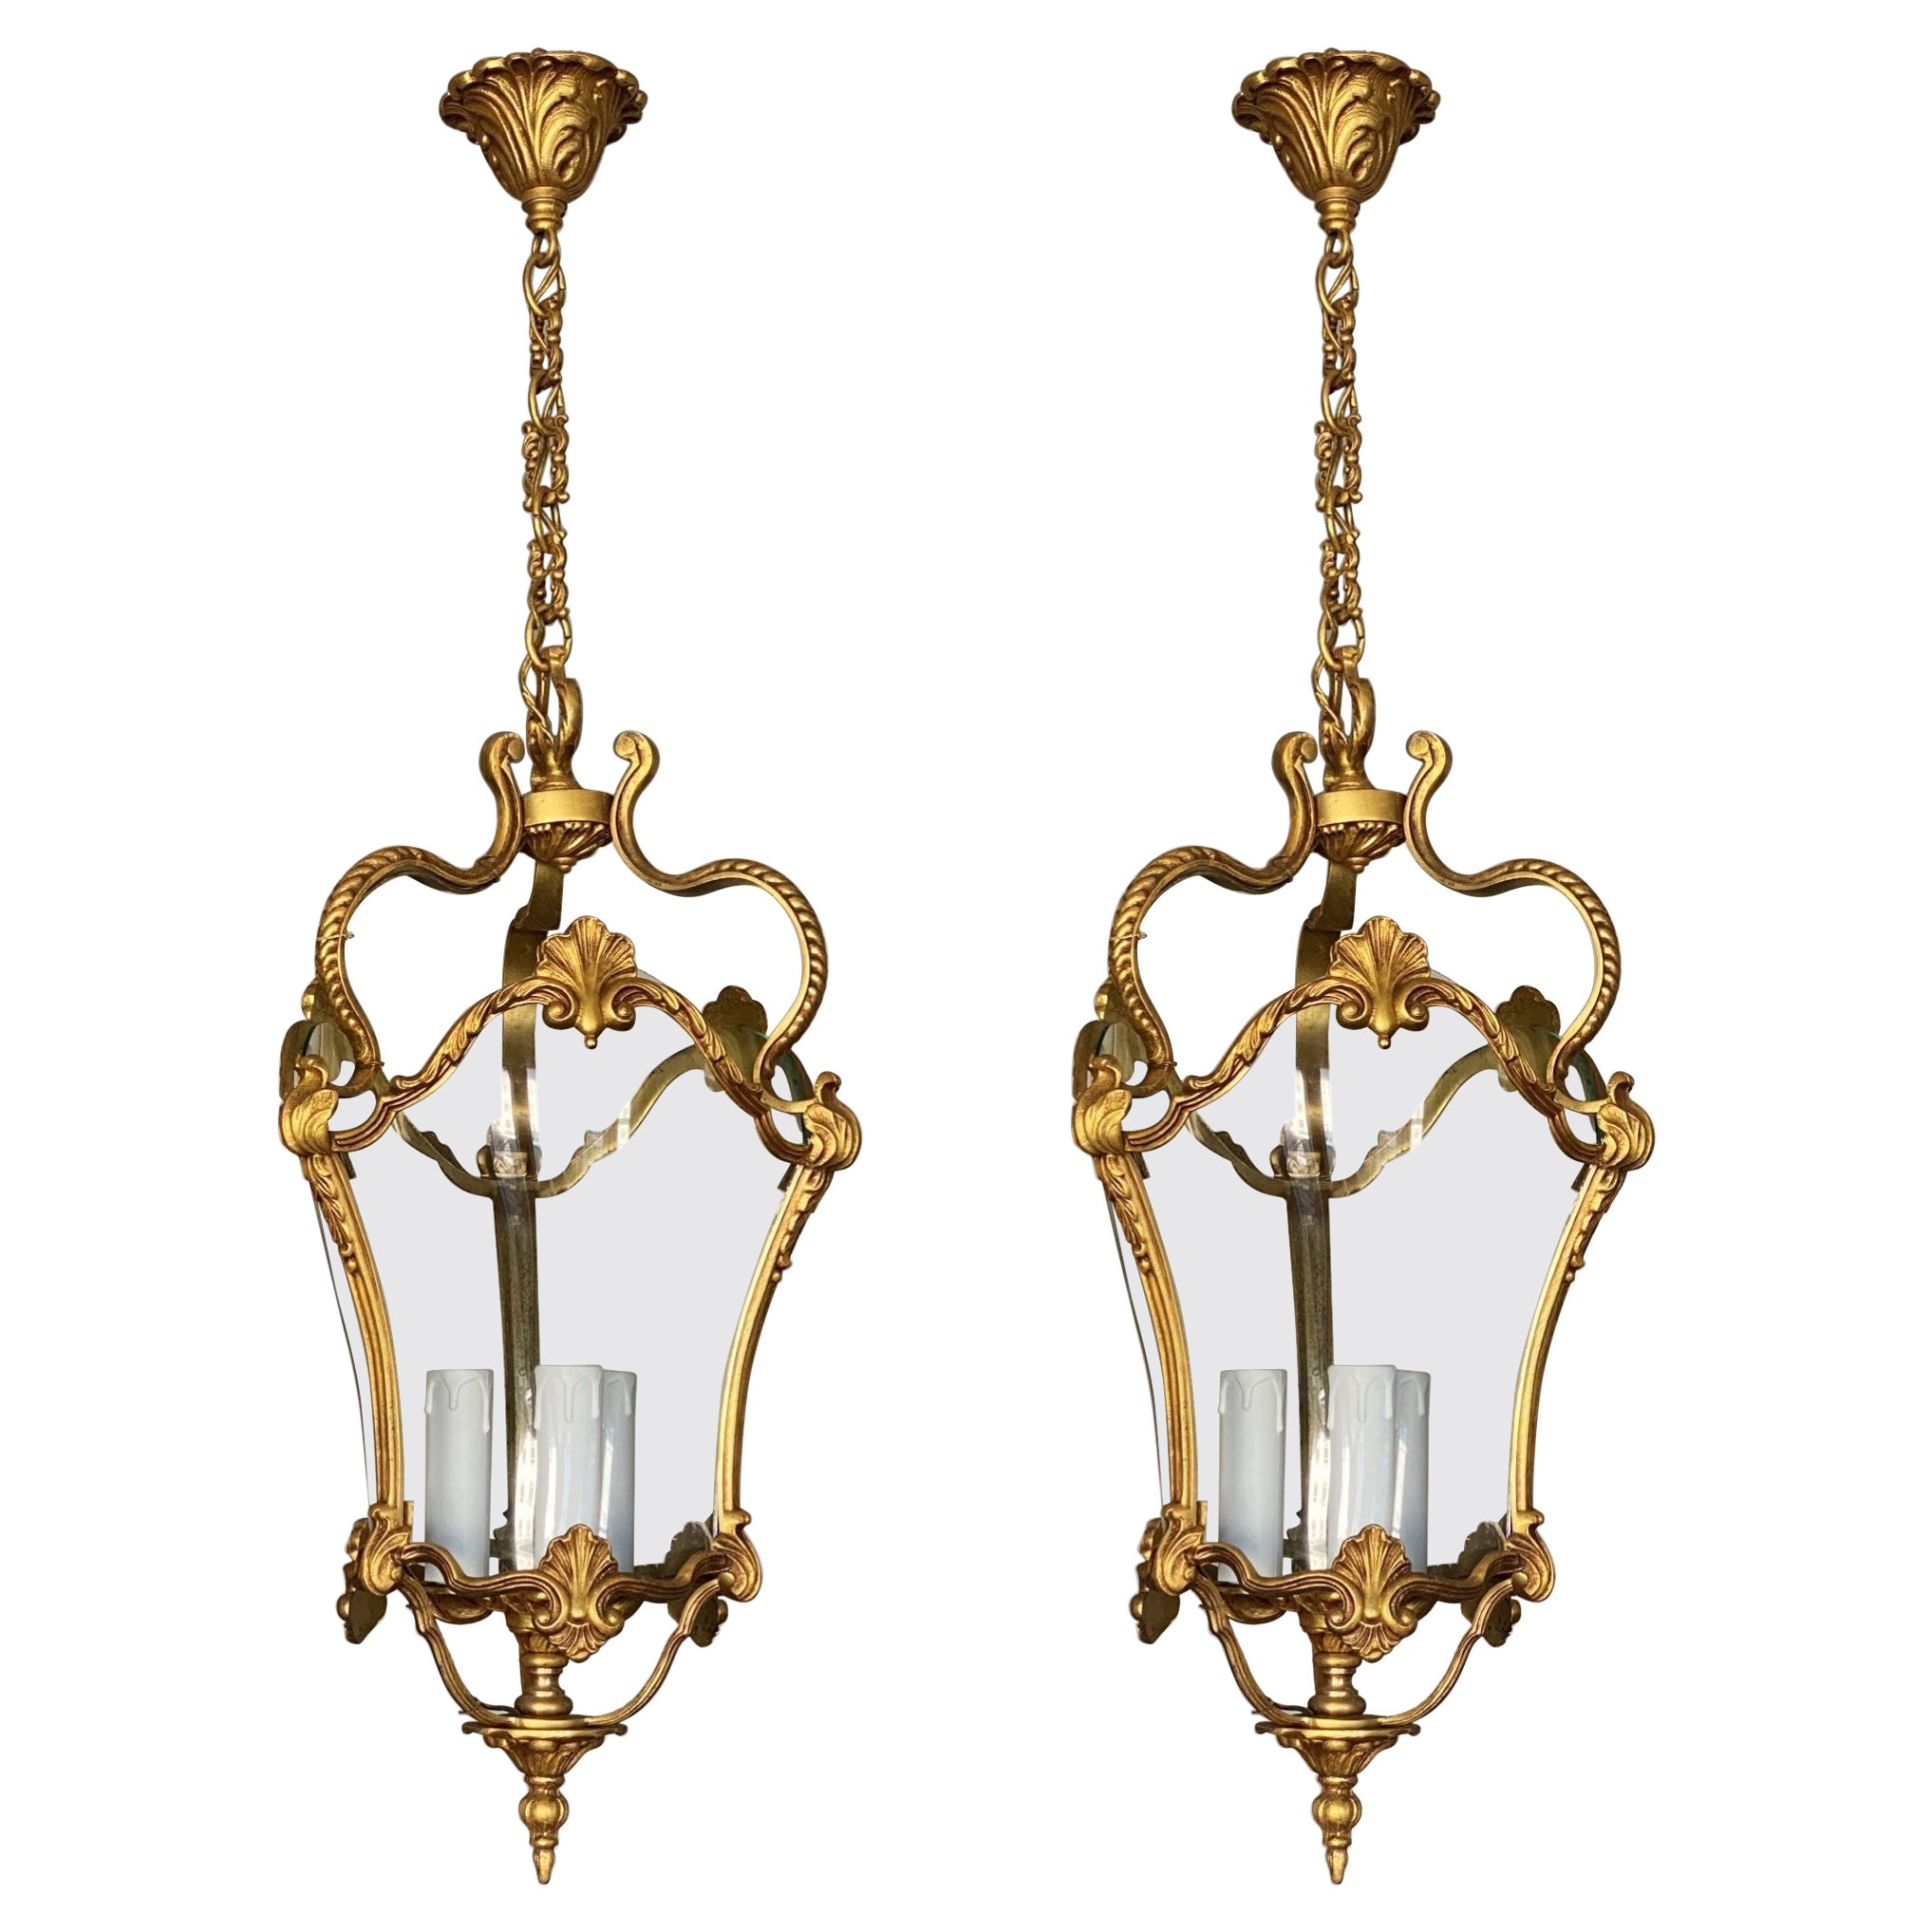 Pair of  French Art Deco Arched Crystal Gilt Bronze Three-Light Lanterns